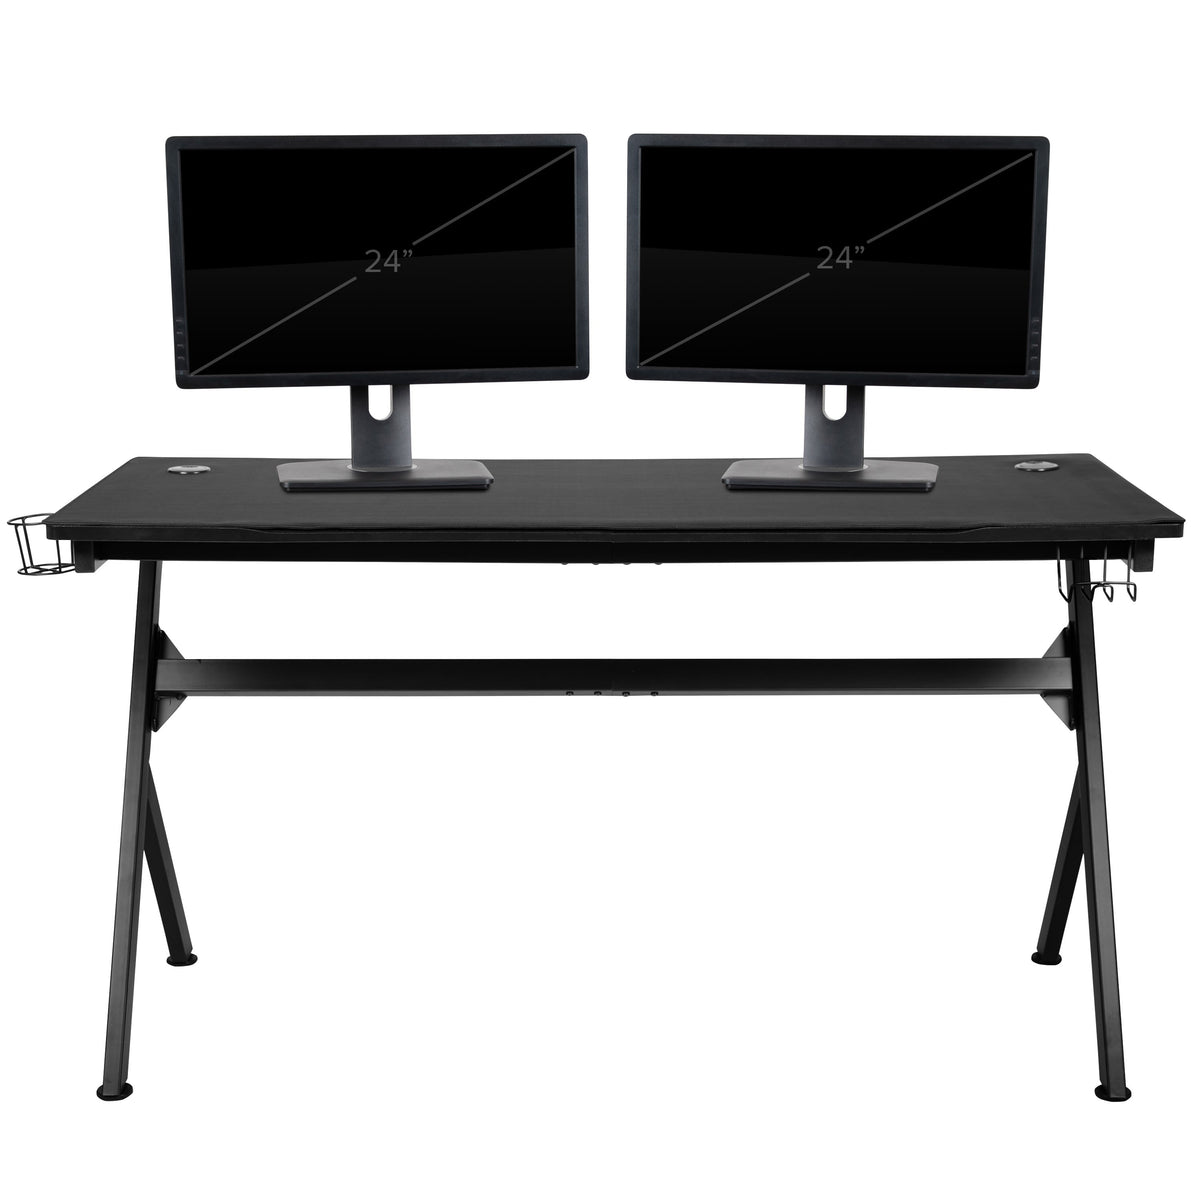 Gray |#| Black/Gray Gaming Desk Bundle - Cup & Headphone Holders/Mouse Pad Top